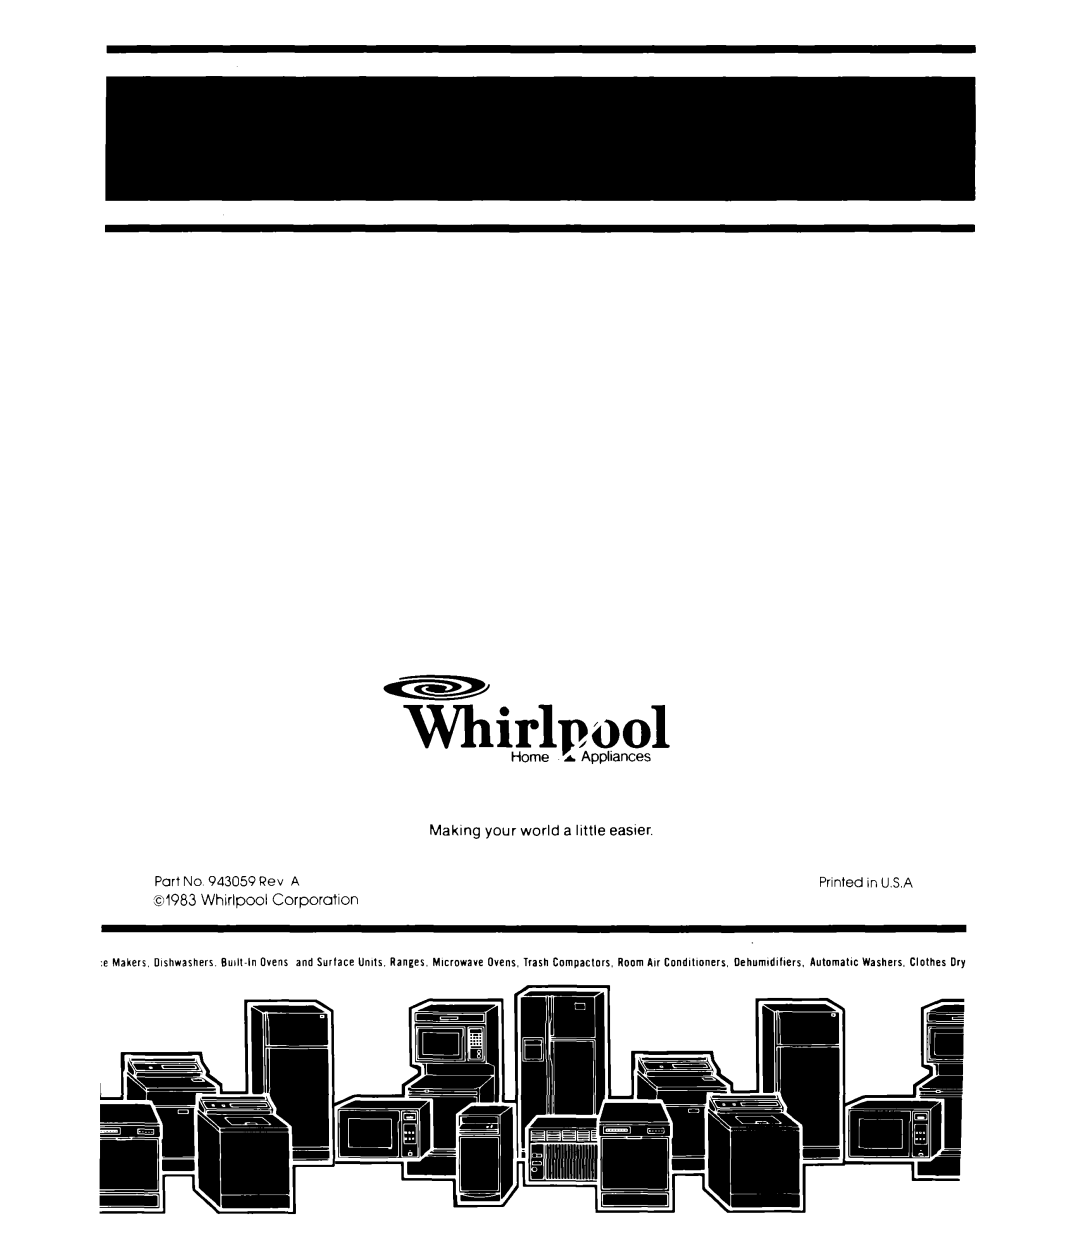 Whirlpool ET22MK manual Home A /Appliances, Making your world a little easier, ~1983 Whirlpool Corporation 